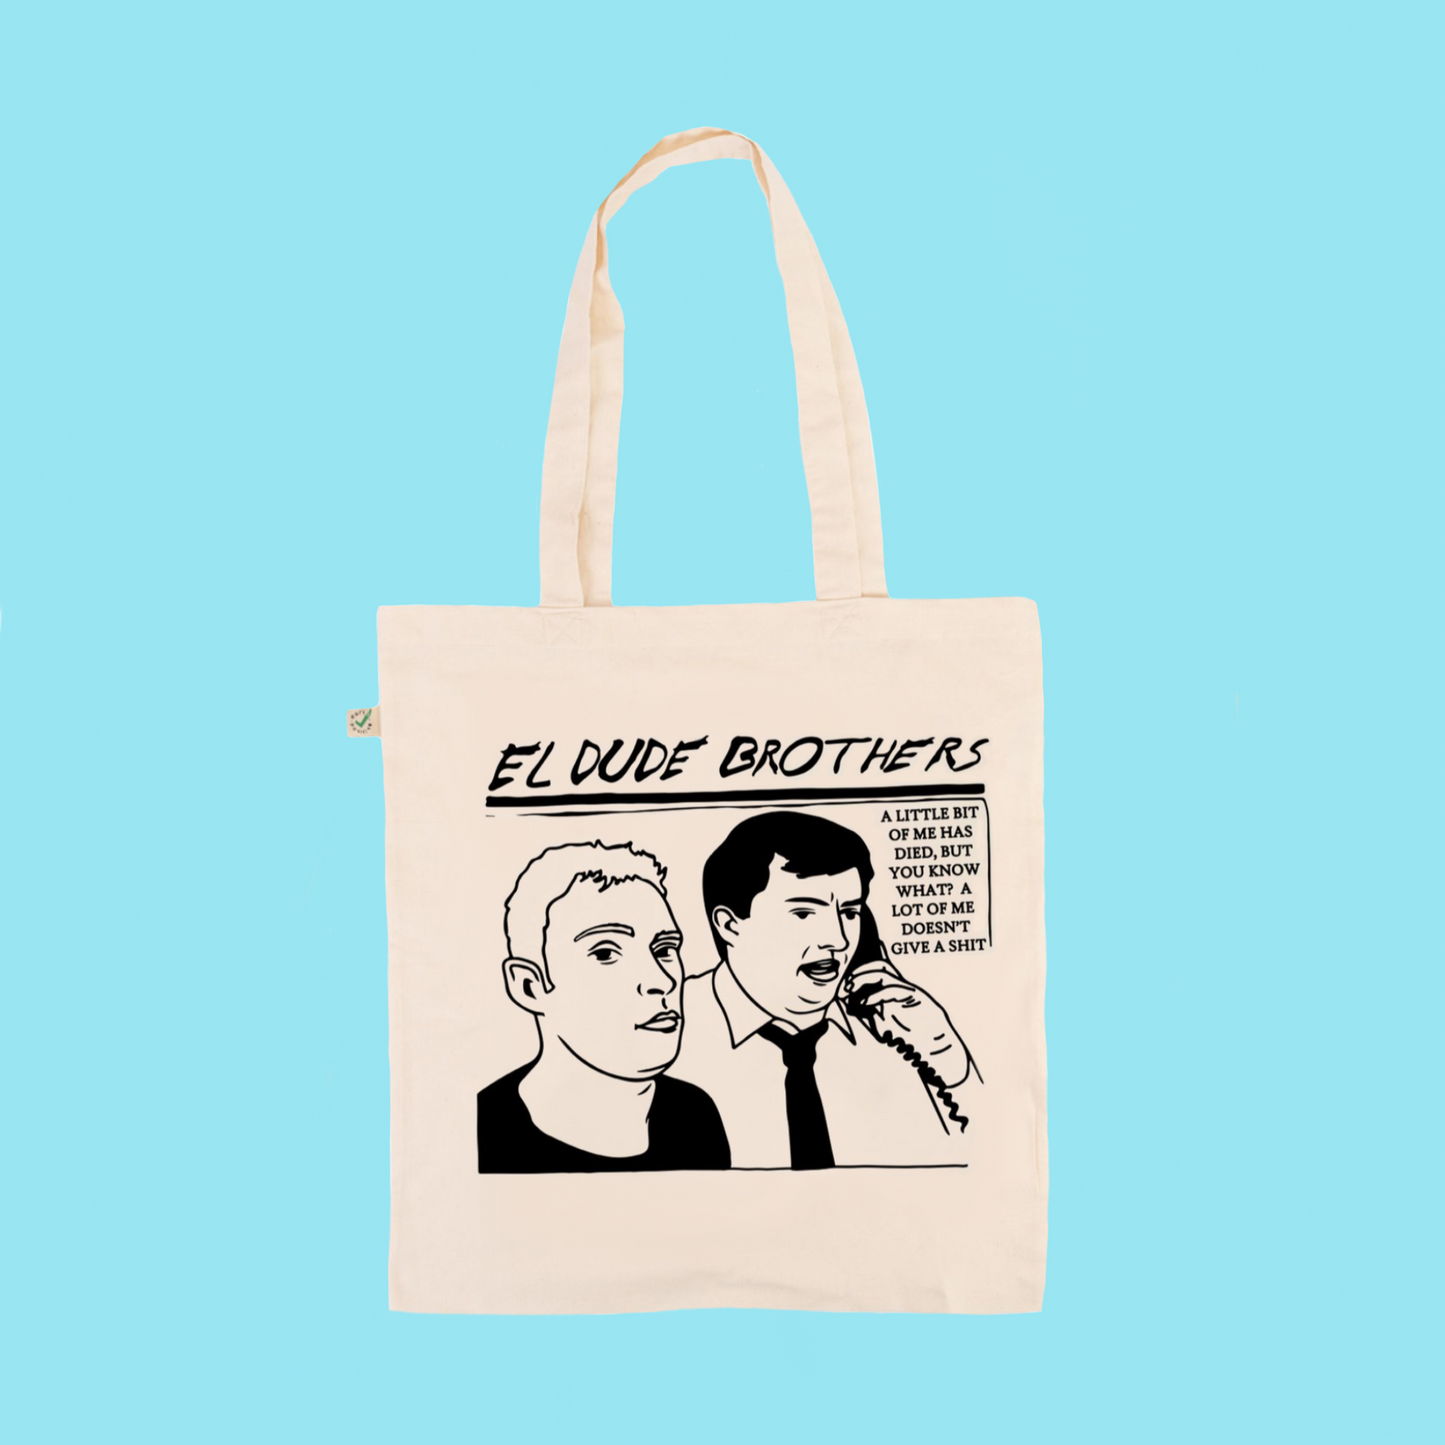 El Dude Brothers  - Earth Positive Ethical tote.